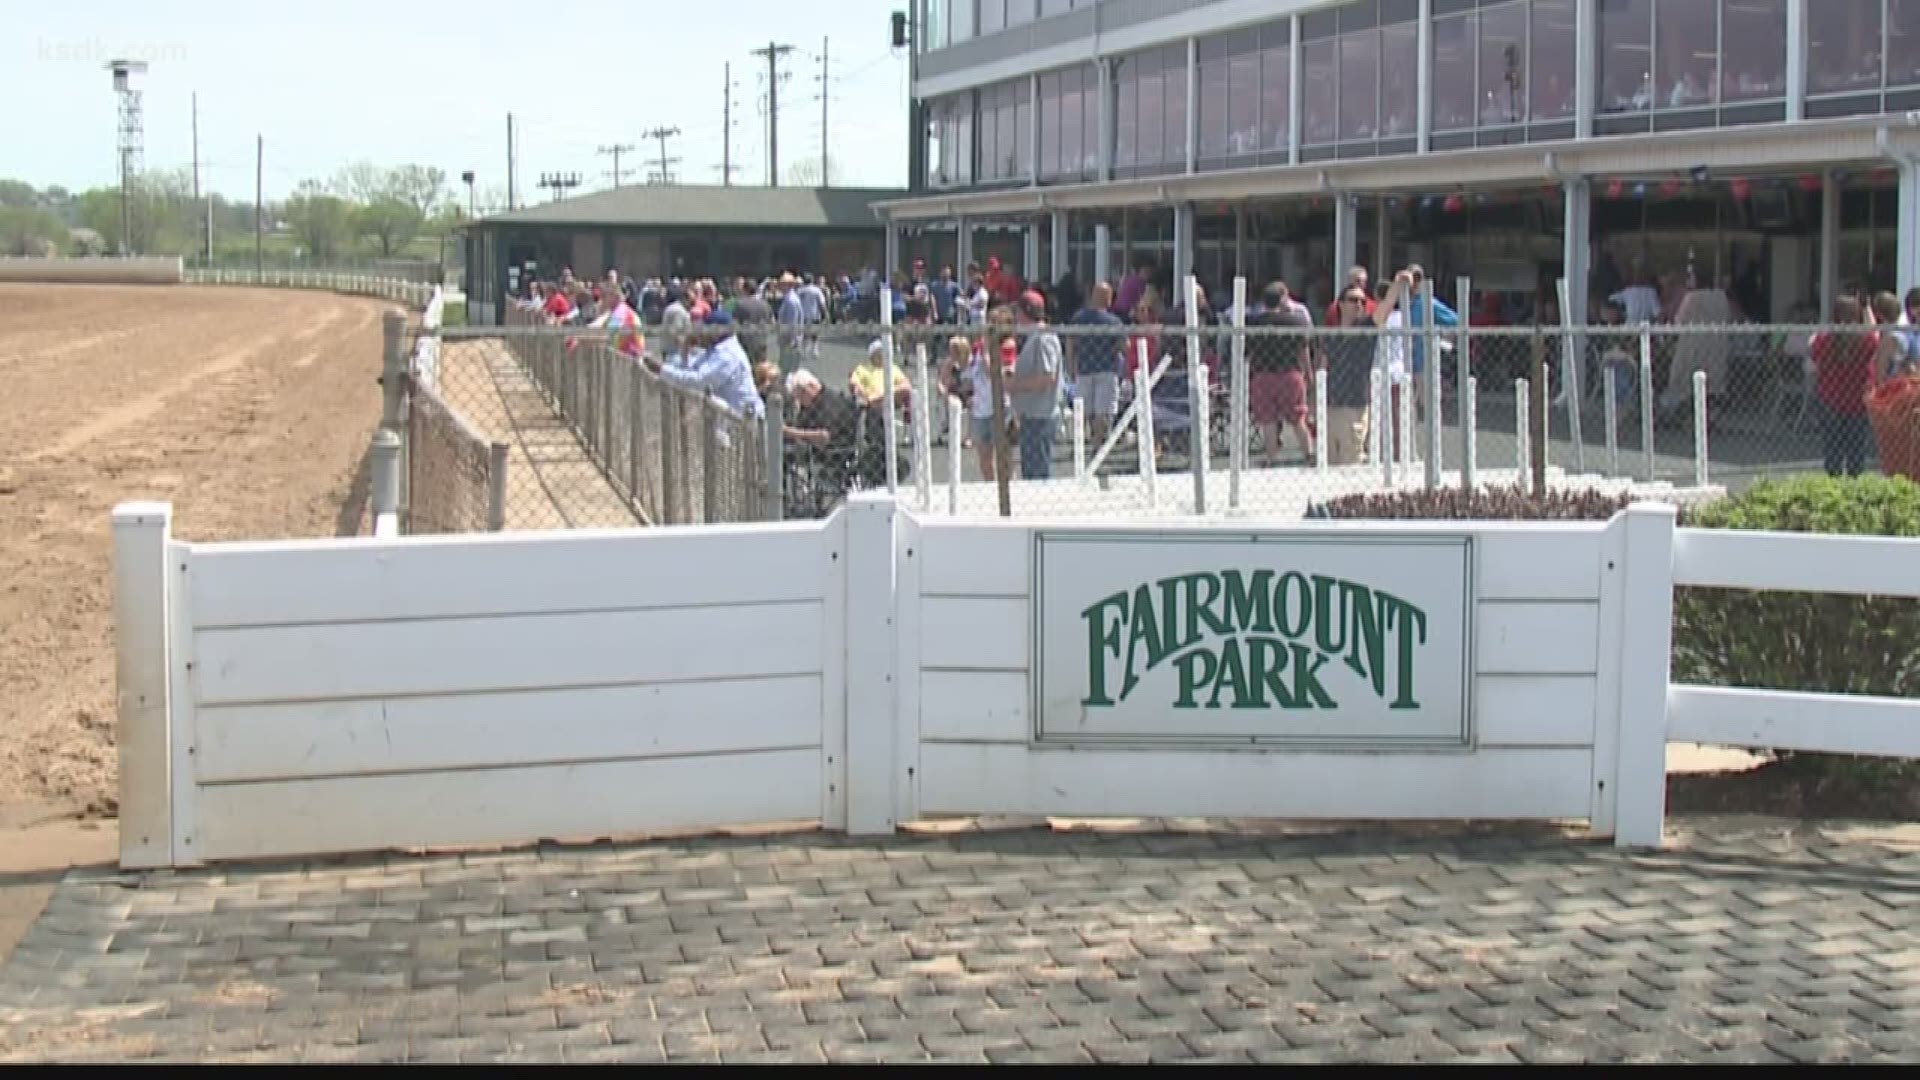 Illinois lawmakers passed a massive gaming expansion law. It adds new casinos and makes sports betting illegal. Fairmount Park is poised to benefit.